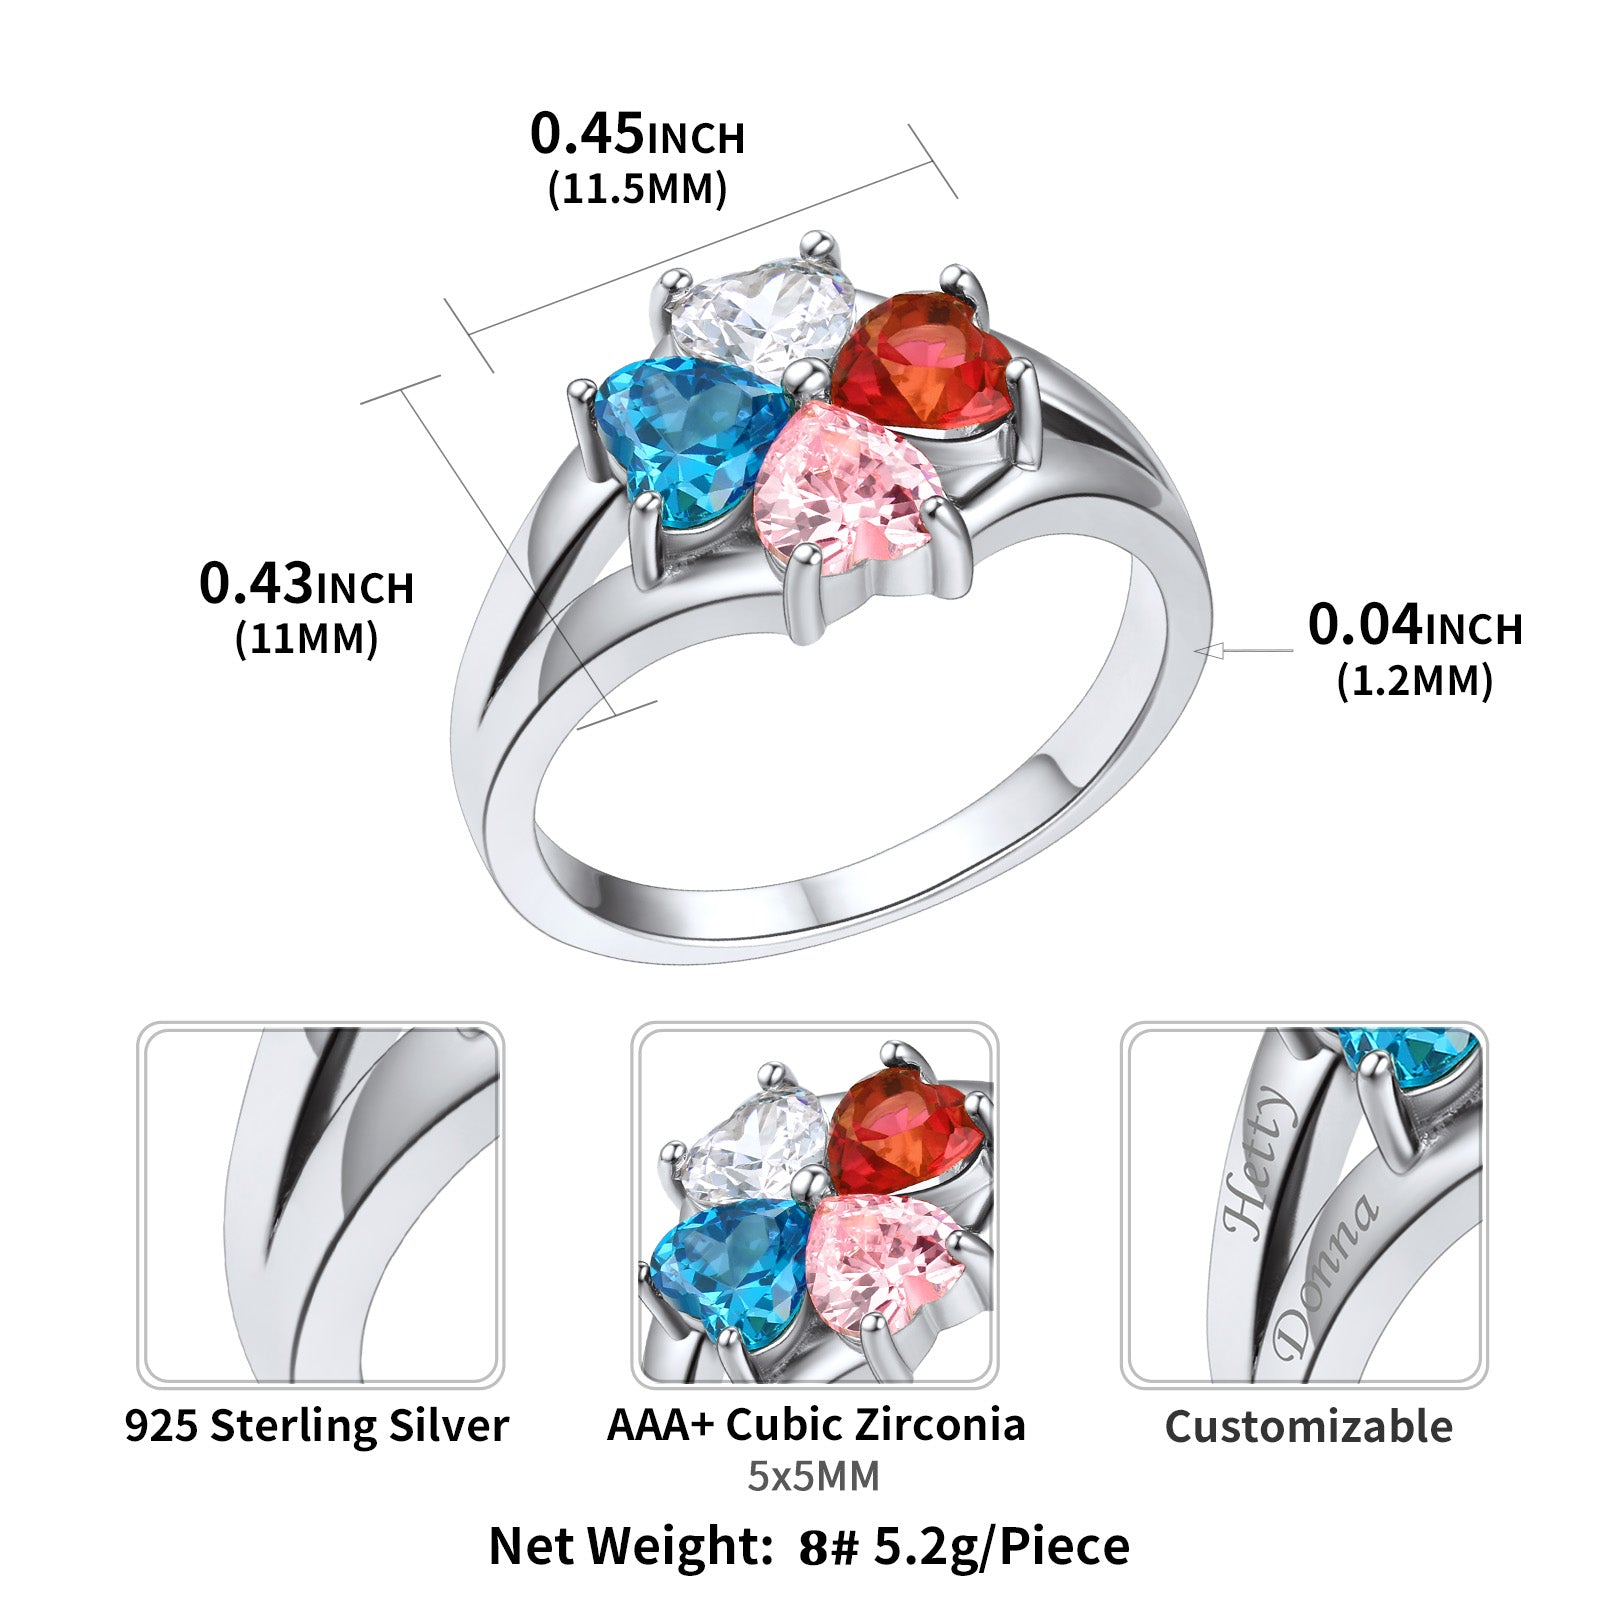 Find Your Ring Size in Different Countries